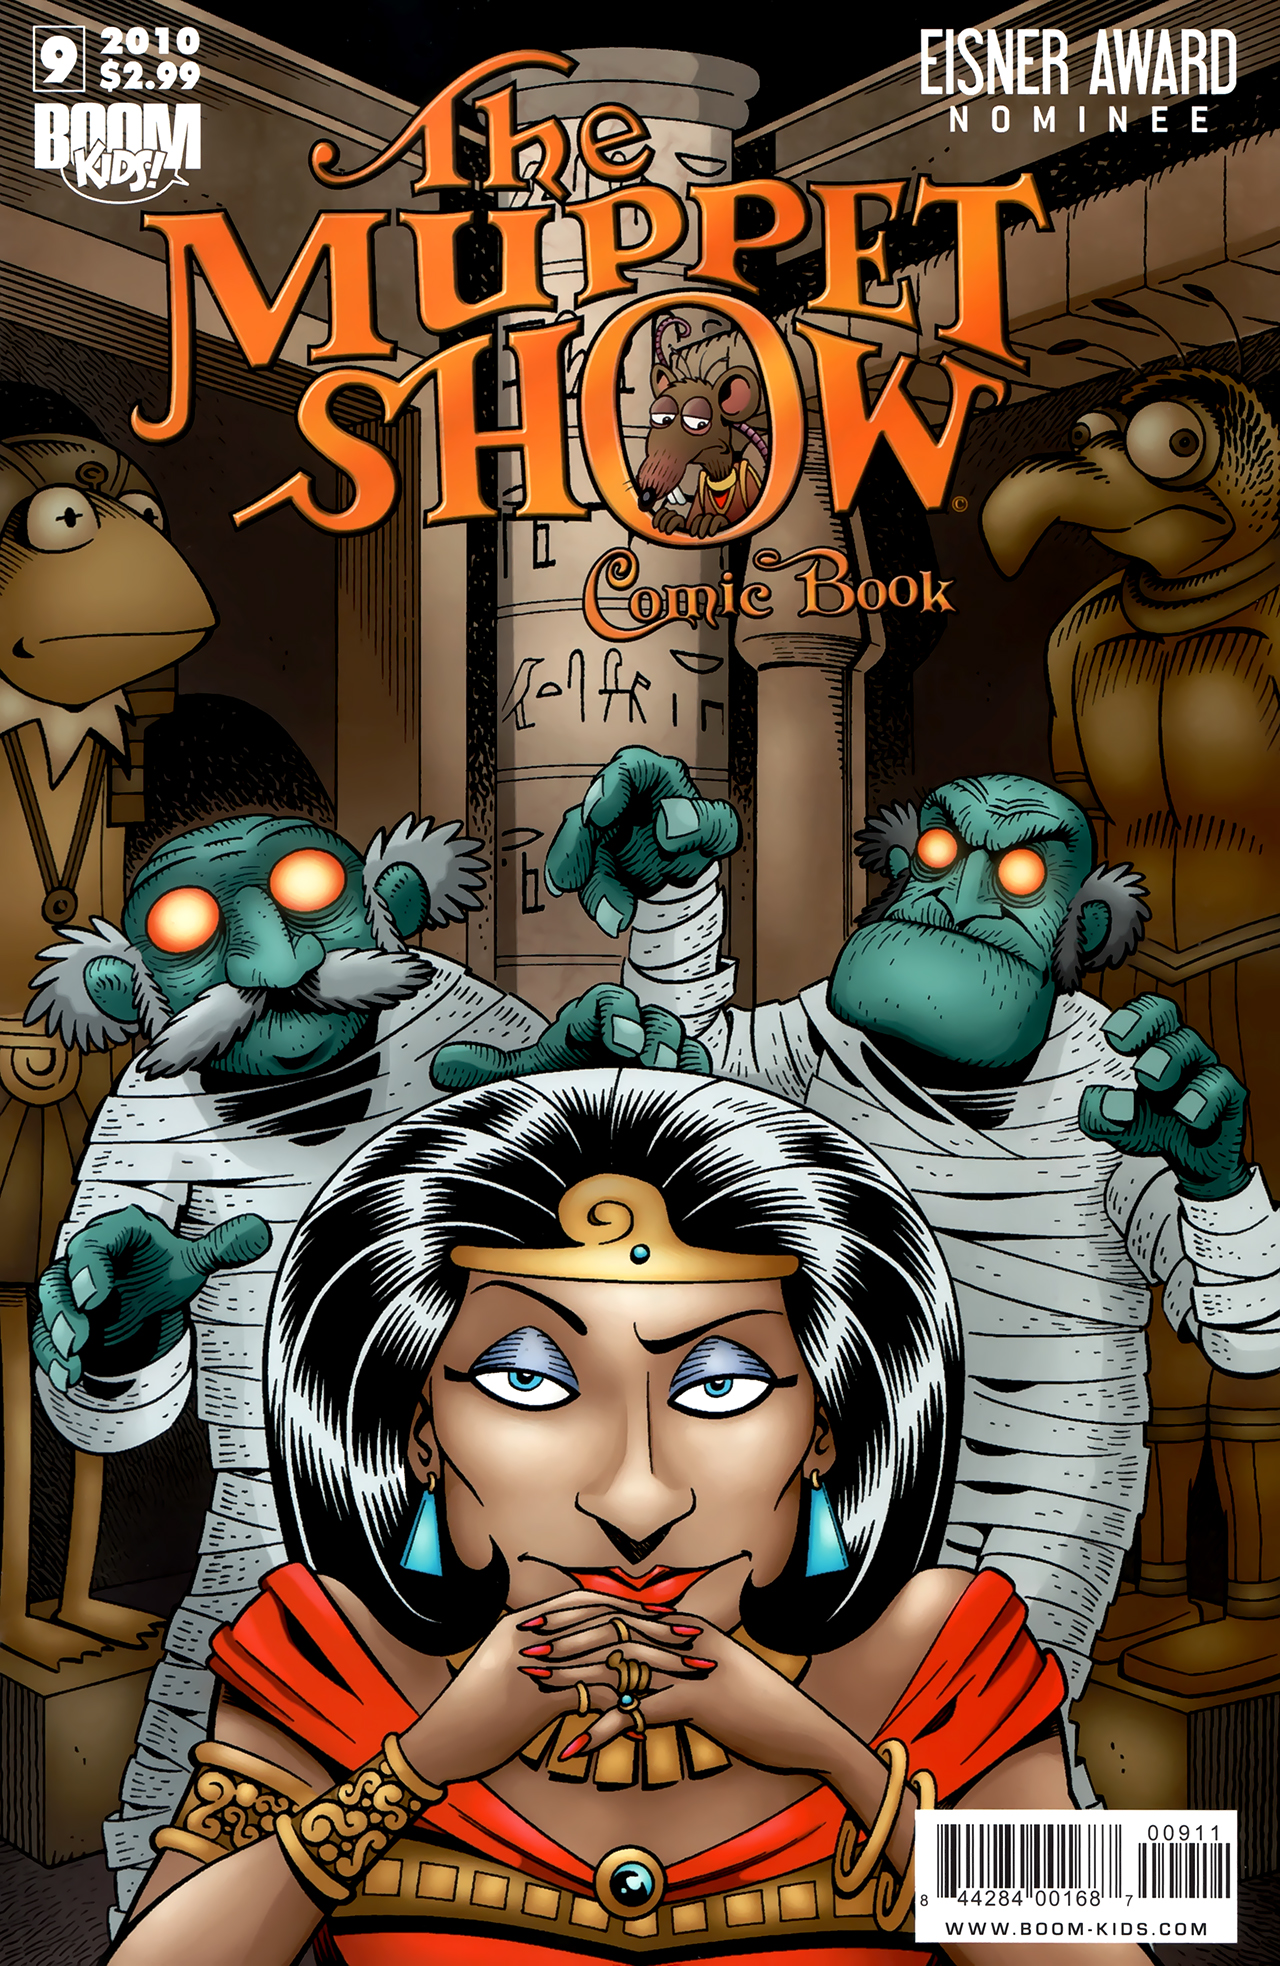 Read online The Muppet Show: The Comic Book comic -  Issue #9 - 1